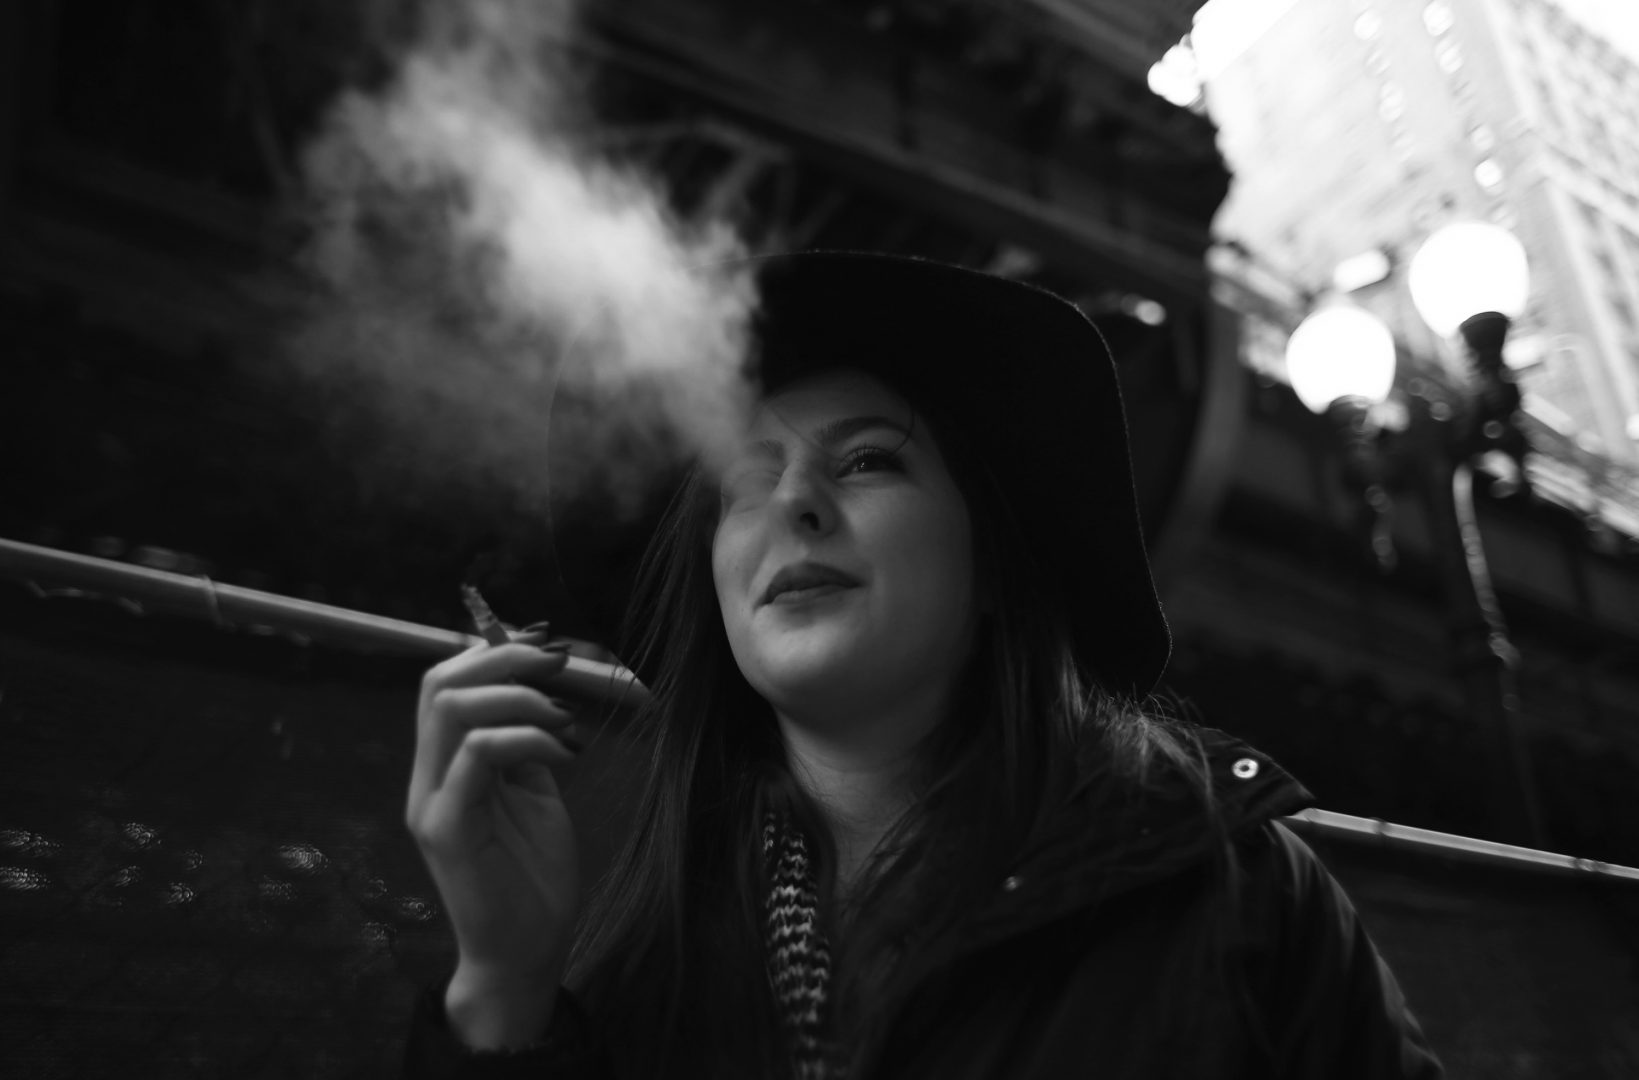 Melanie Walchli, 20, smokes during a downtown Chicago walk on January 14, 2016. She said she supports the idea of raising the minimum age to buy tobacco. Mayor Rahm Emanuel is proposing raising the minimum age to buy tobacco from 18 to 21. (Abel Uribe/Chicago Tribune/TNS)